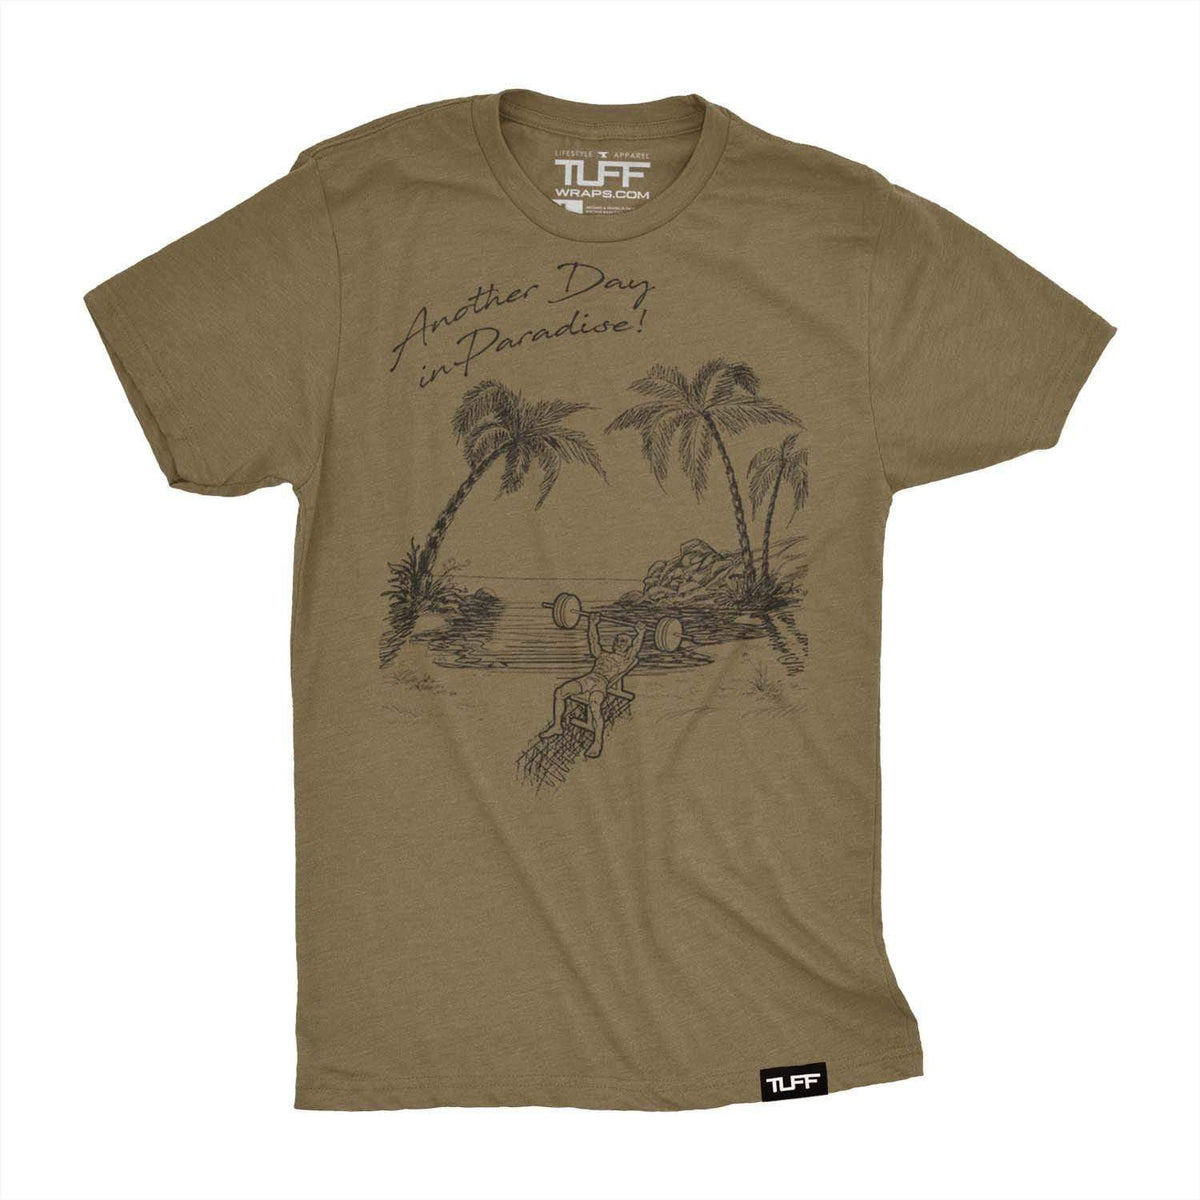 Another Day in Paradise Tee S / Military Green TuffWraps.com